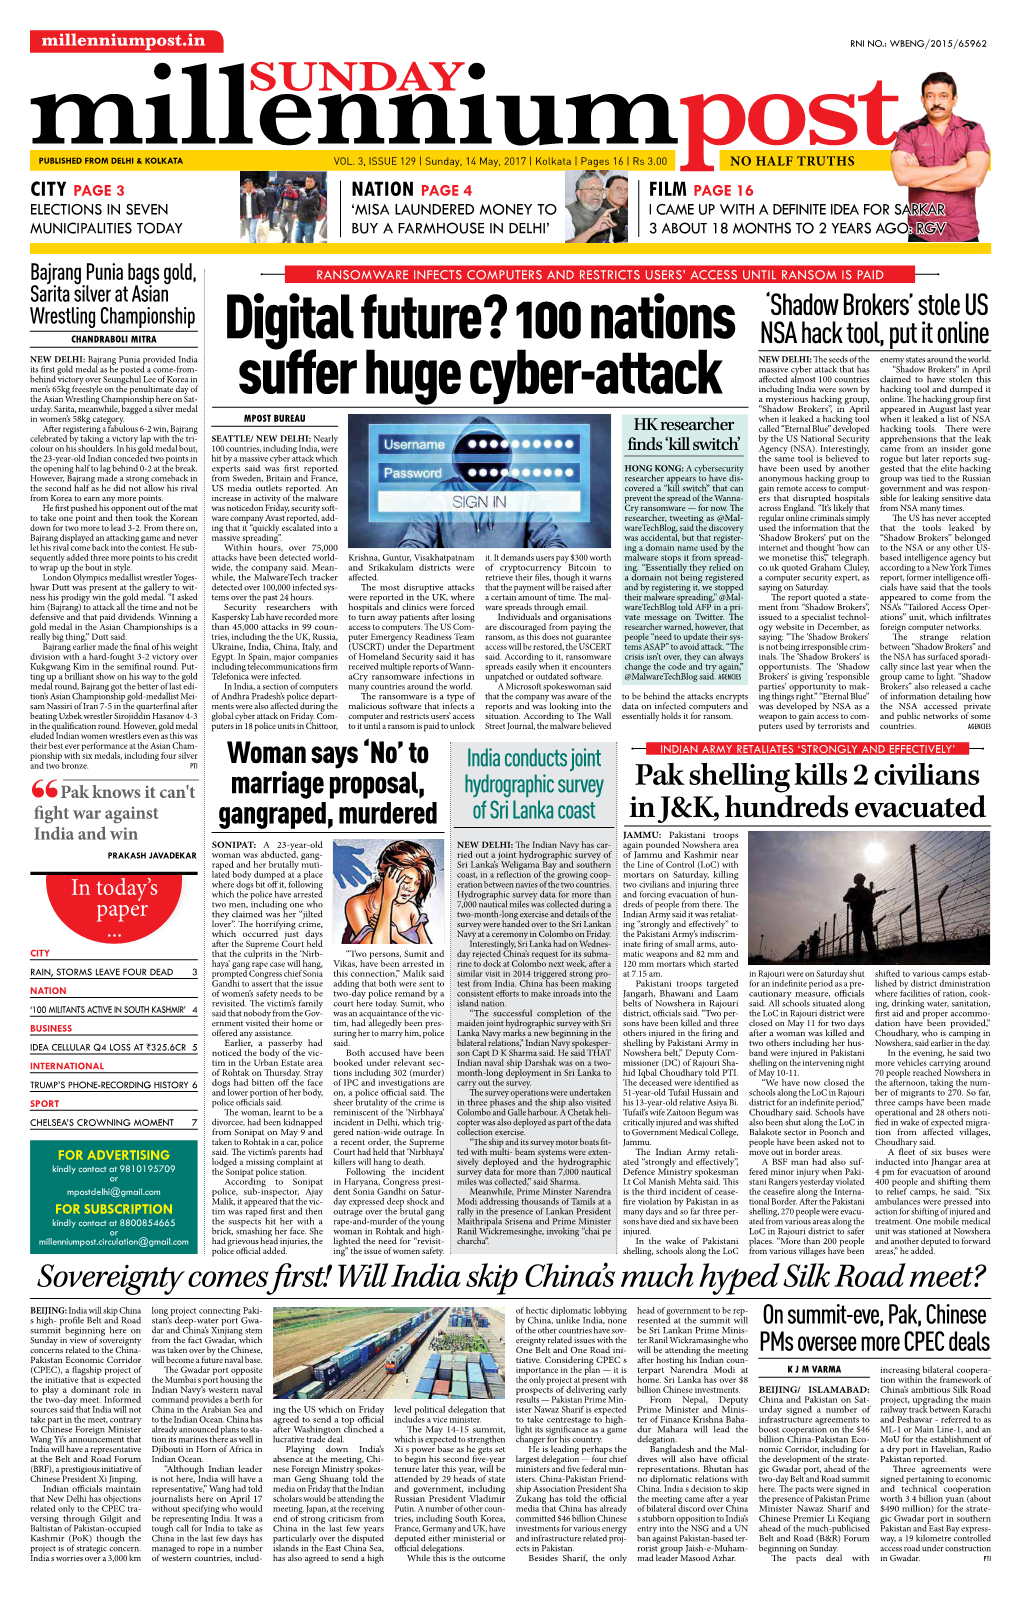 Digital Future? 100 Nations NSA Hack Tool, Put It Online NEW DELHI: Bajrang Punia Provided India NEW DELHI: the Seeds of the Enemy States Around the World